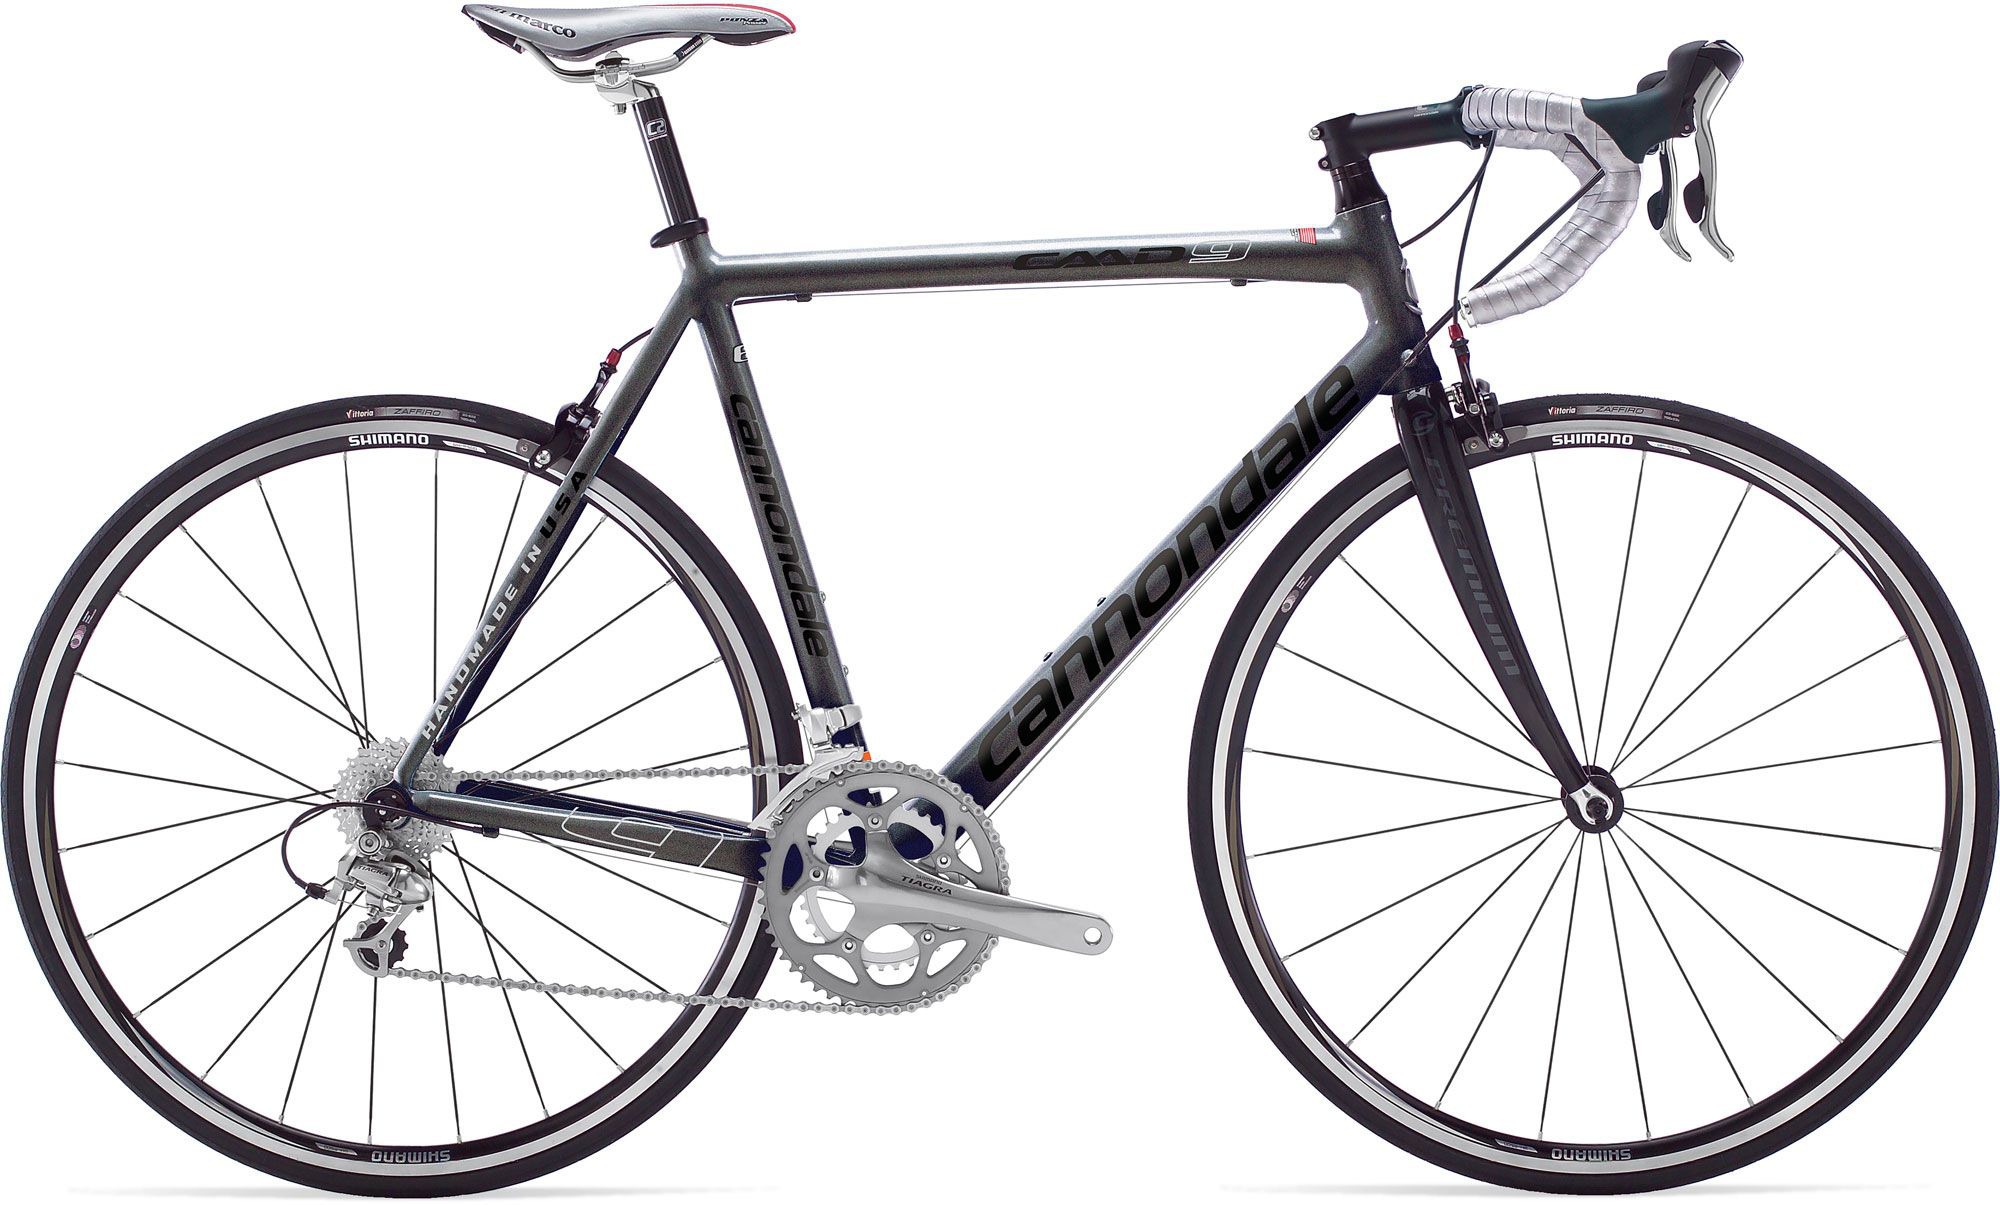 2009 Cannondale CAAD9 6 - Bicycle 